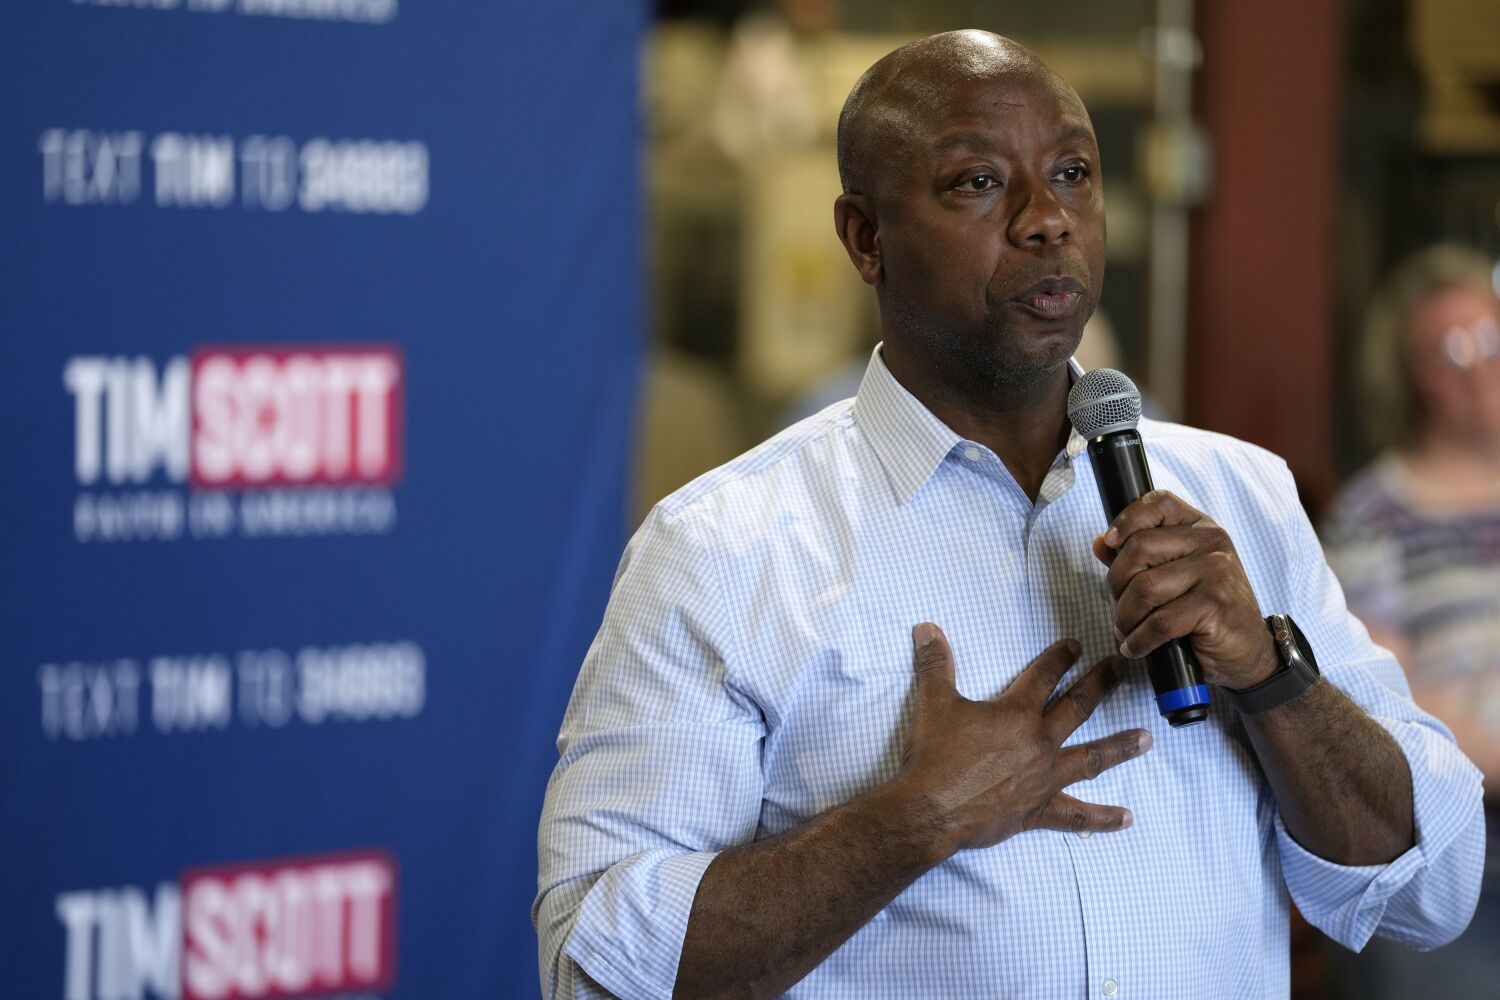 Granderson: Tim Scott is the candidate Republicans would want, except they've never heard of him